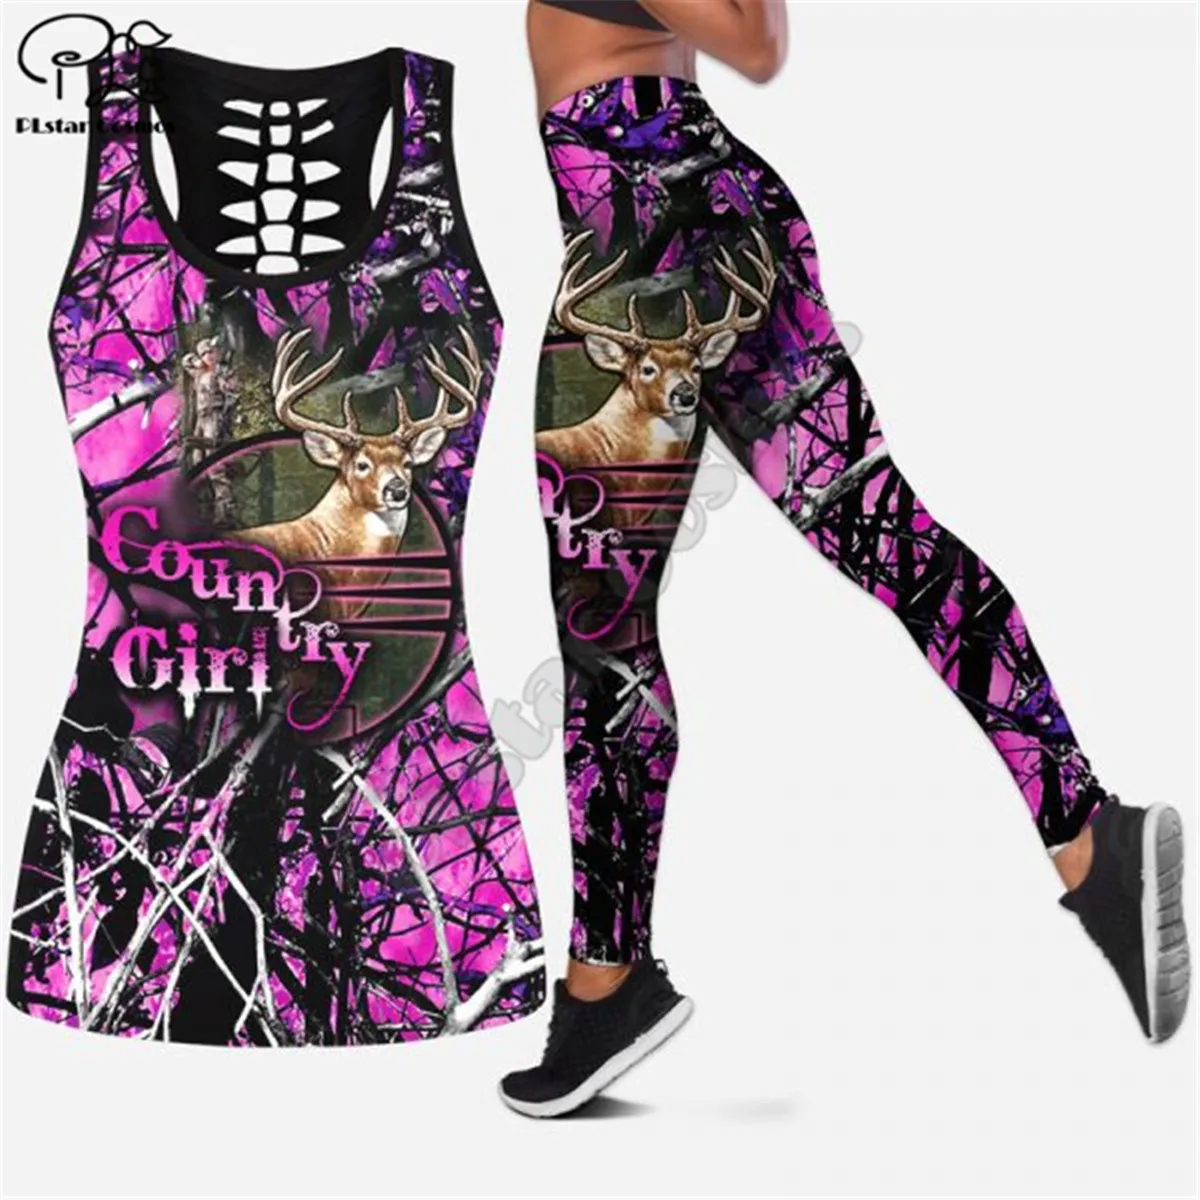 

PLstar Cosmos Women's Workout Pants Hunting deer 3D Printed Camisole Cami Vest Yoga Tank Tops Fitness Soft Legging dropshipp